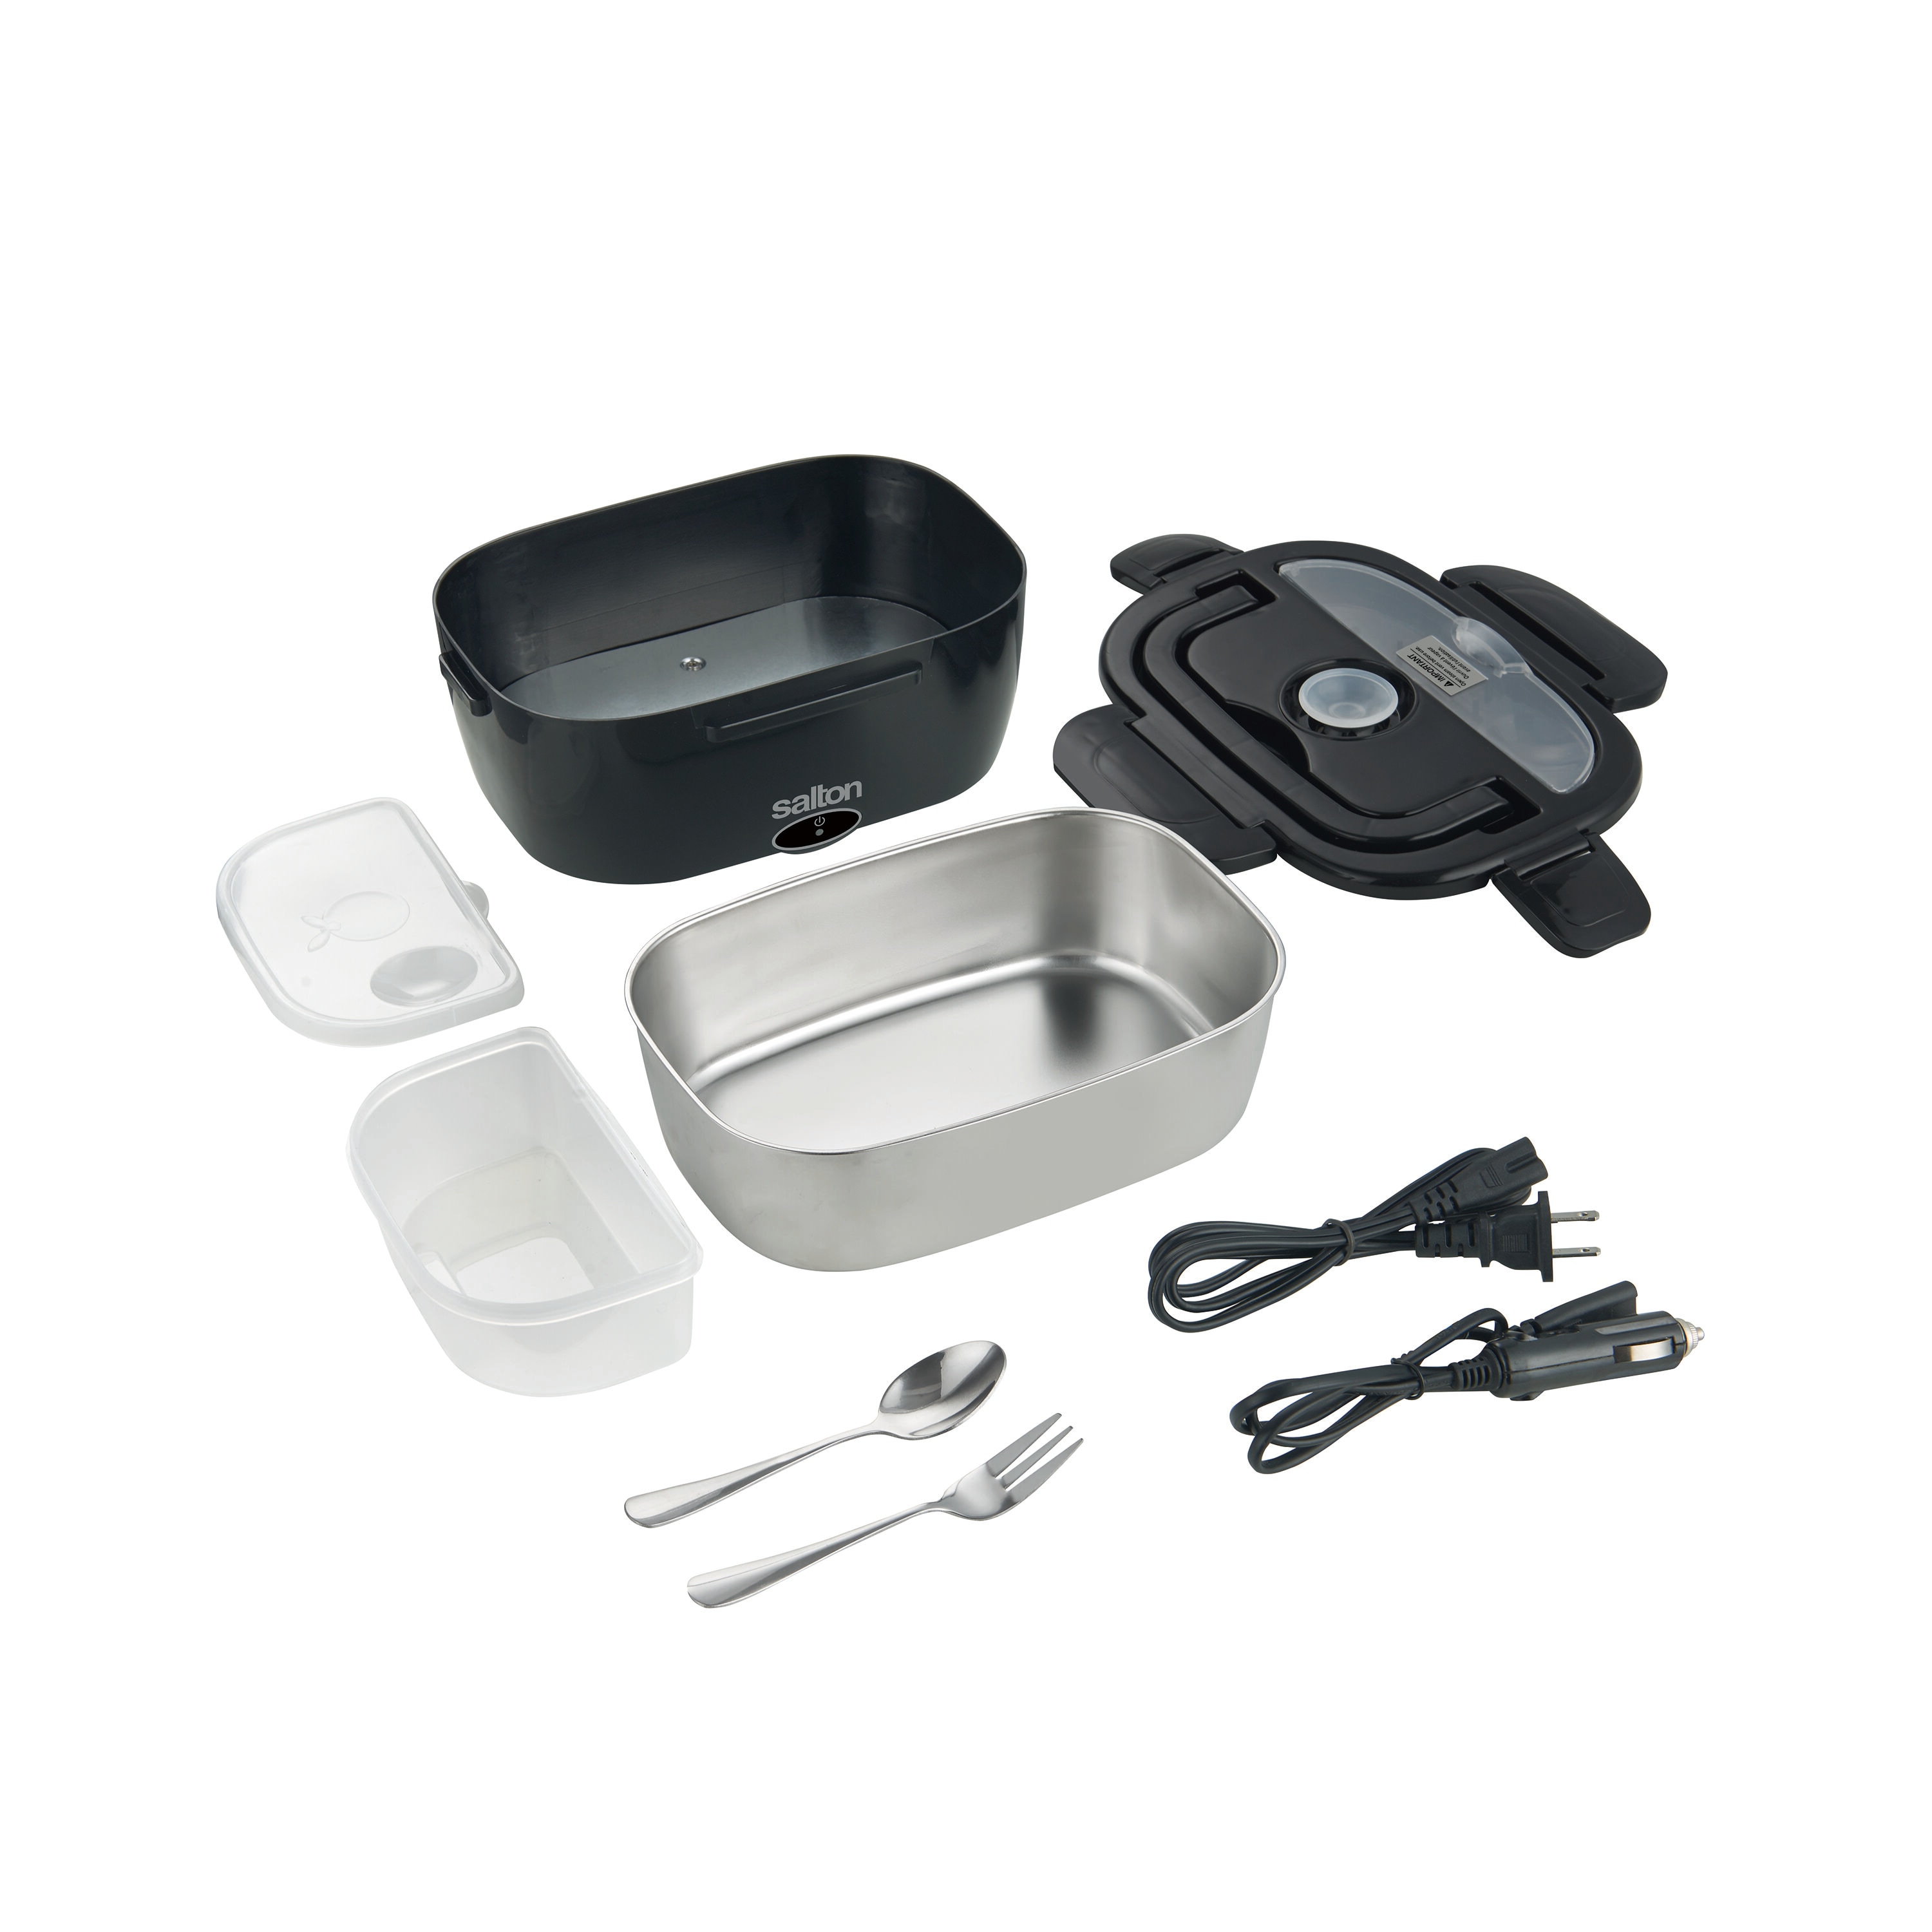 Portable Electric Lunch Box Use And Maintenance Tips